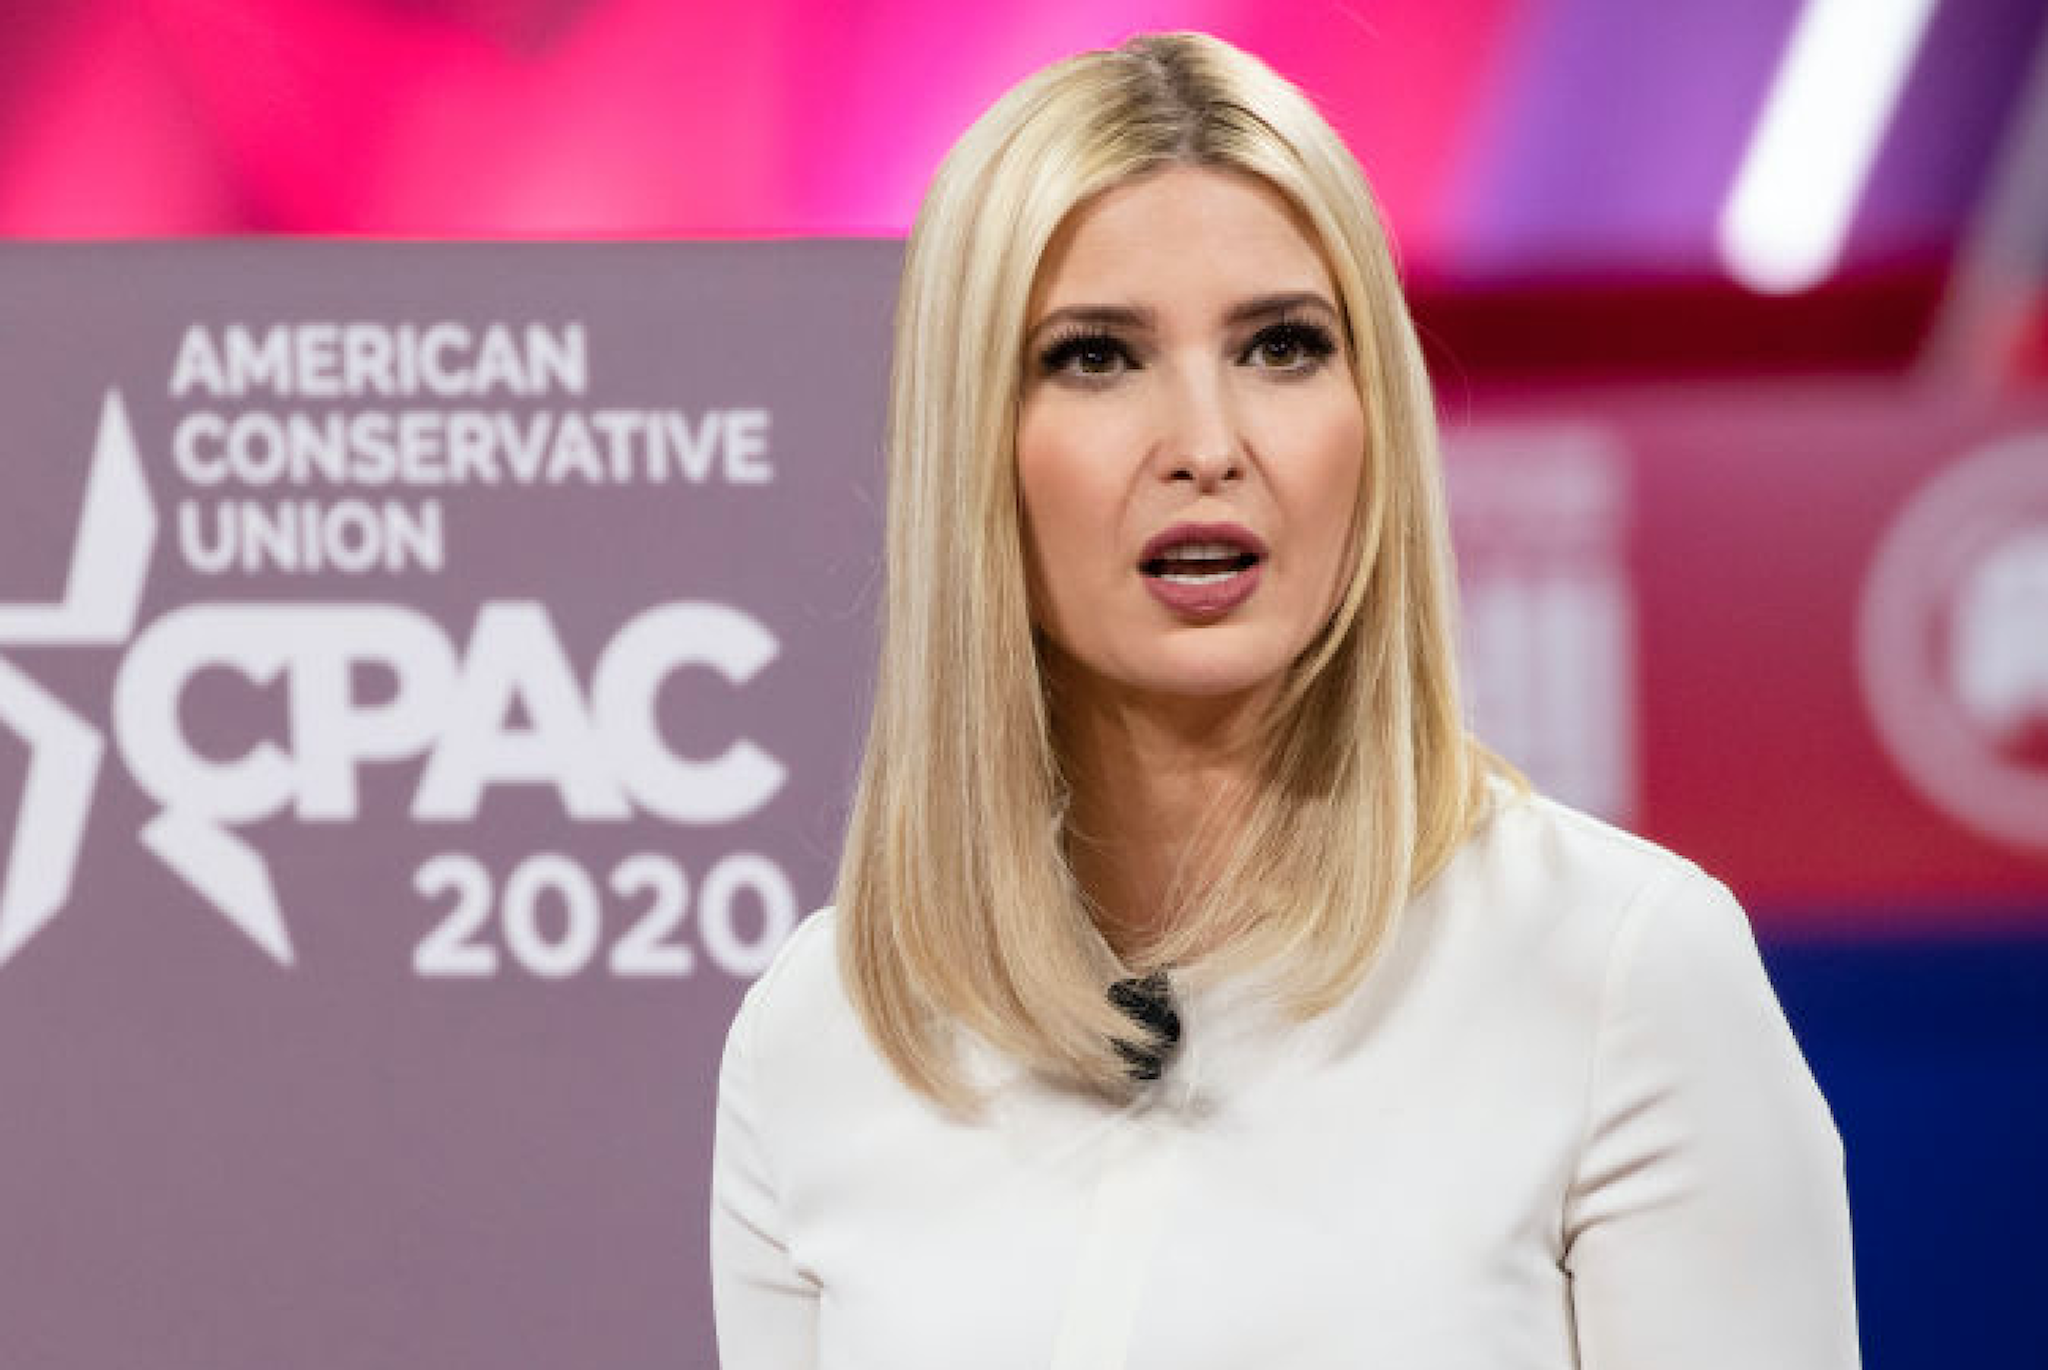 Ivanka Trump, daughter of and Senior Advisor to U.S. President Donald Trump, speaks at the Conservative Political Action Conference 2020 (CPAC) hosted by the American Conservative Union on February 28, 2020 in National Harbor, MD.